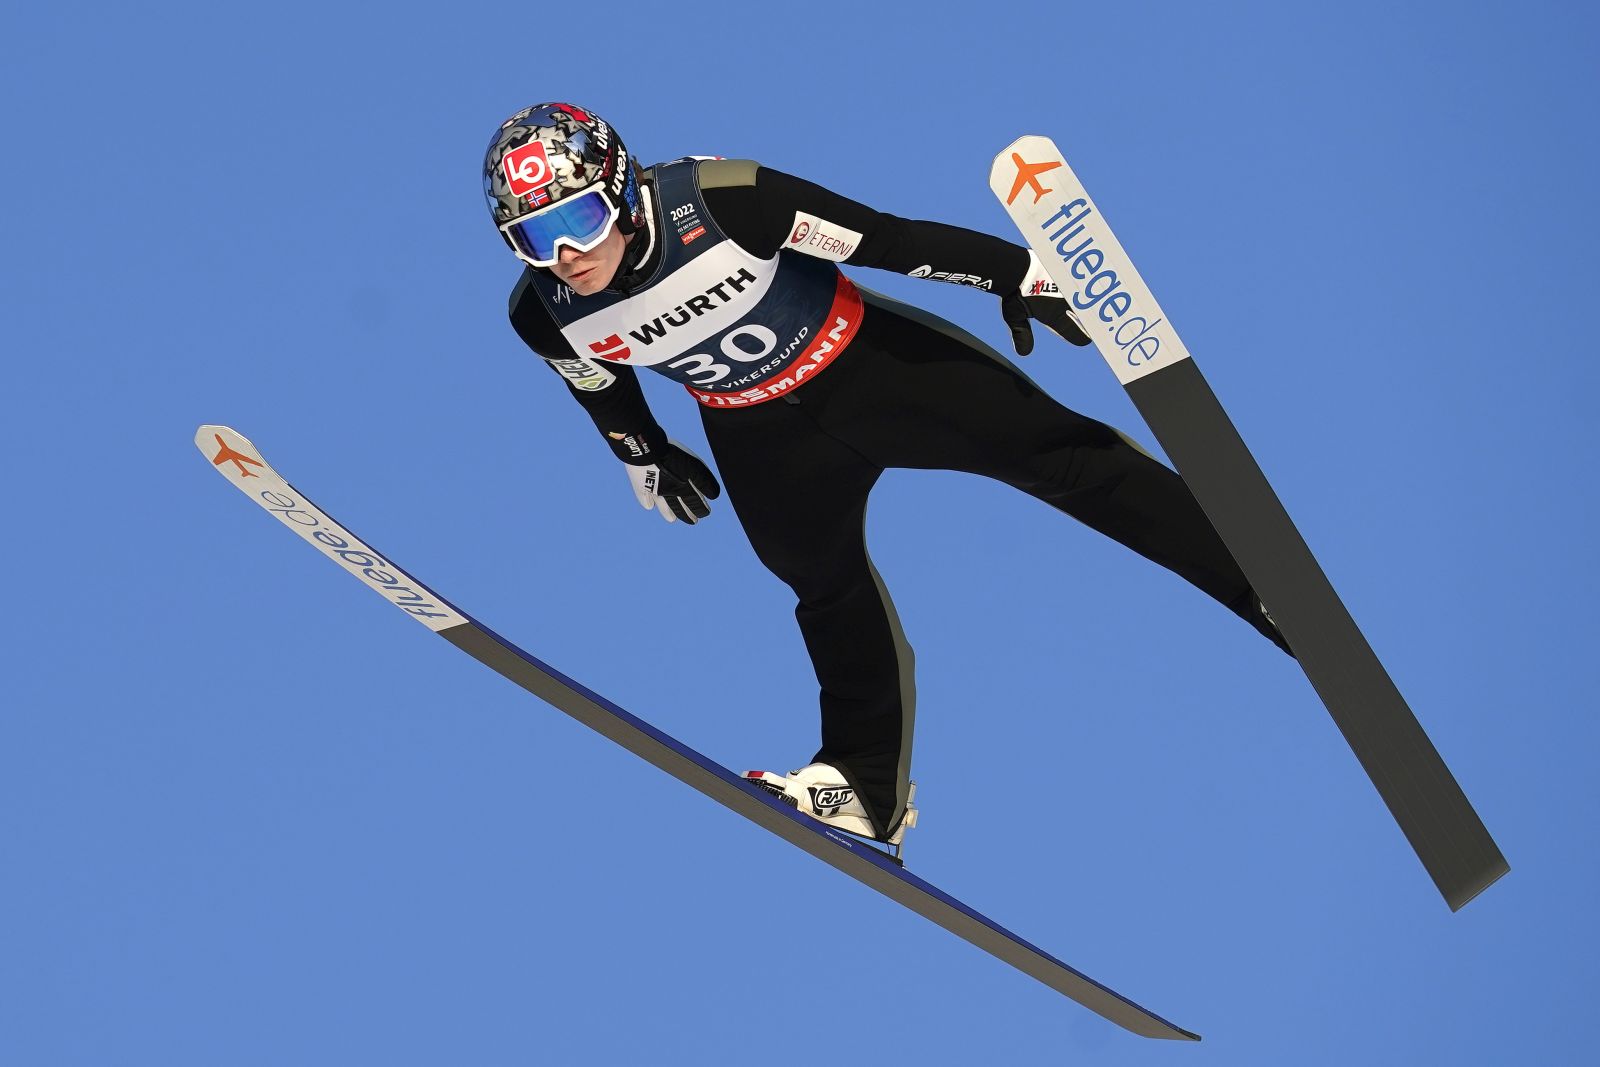 epa09819364 Marius Lindvik of Norway is airborne during the Men's HS240 competition at the FIS Ski Jumping World Cup in Vikersund, Norway, 12 March 2022.  EPA/Terje Bendiksby  NORWAY OUT